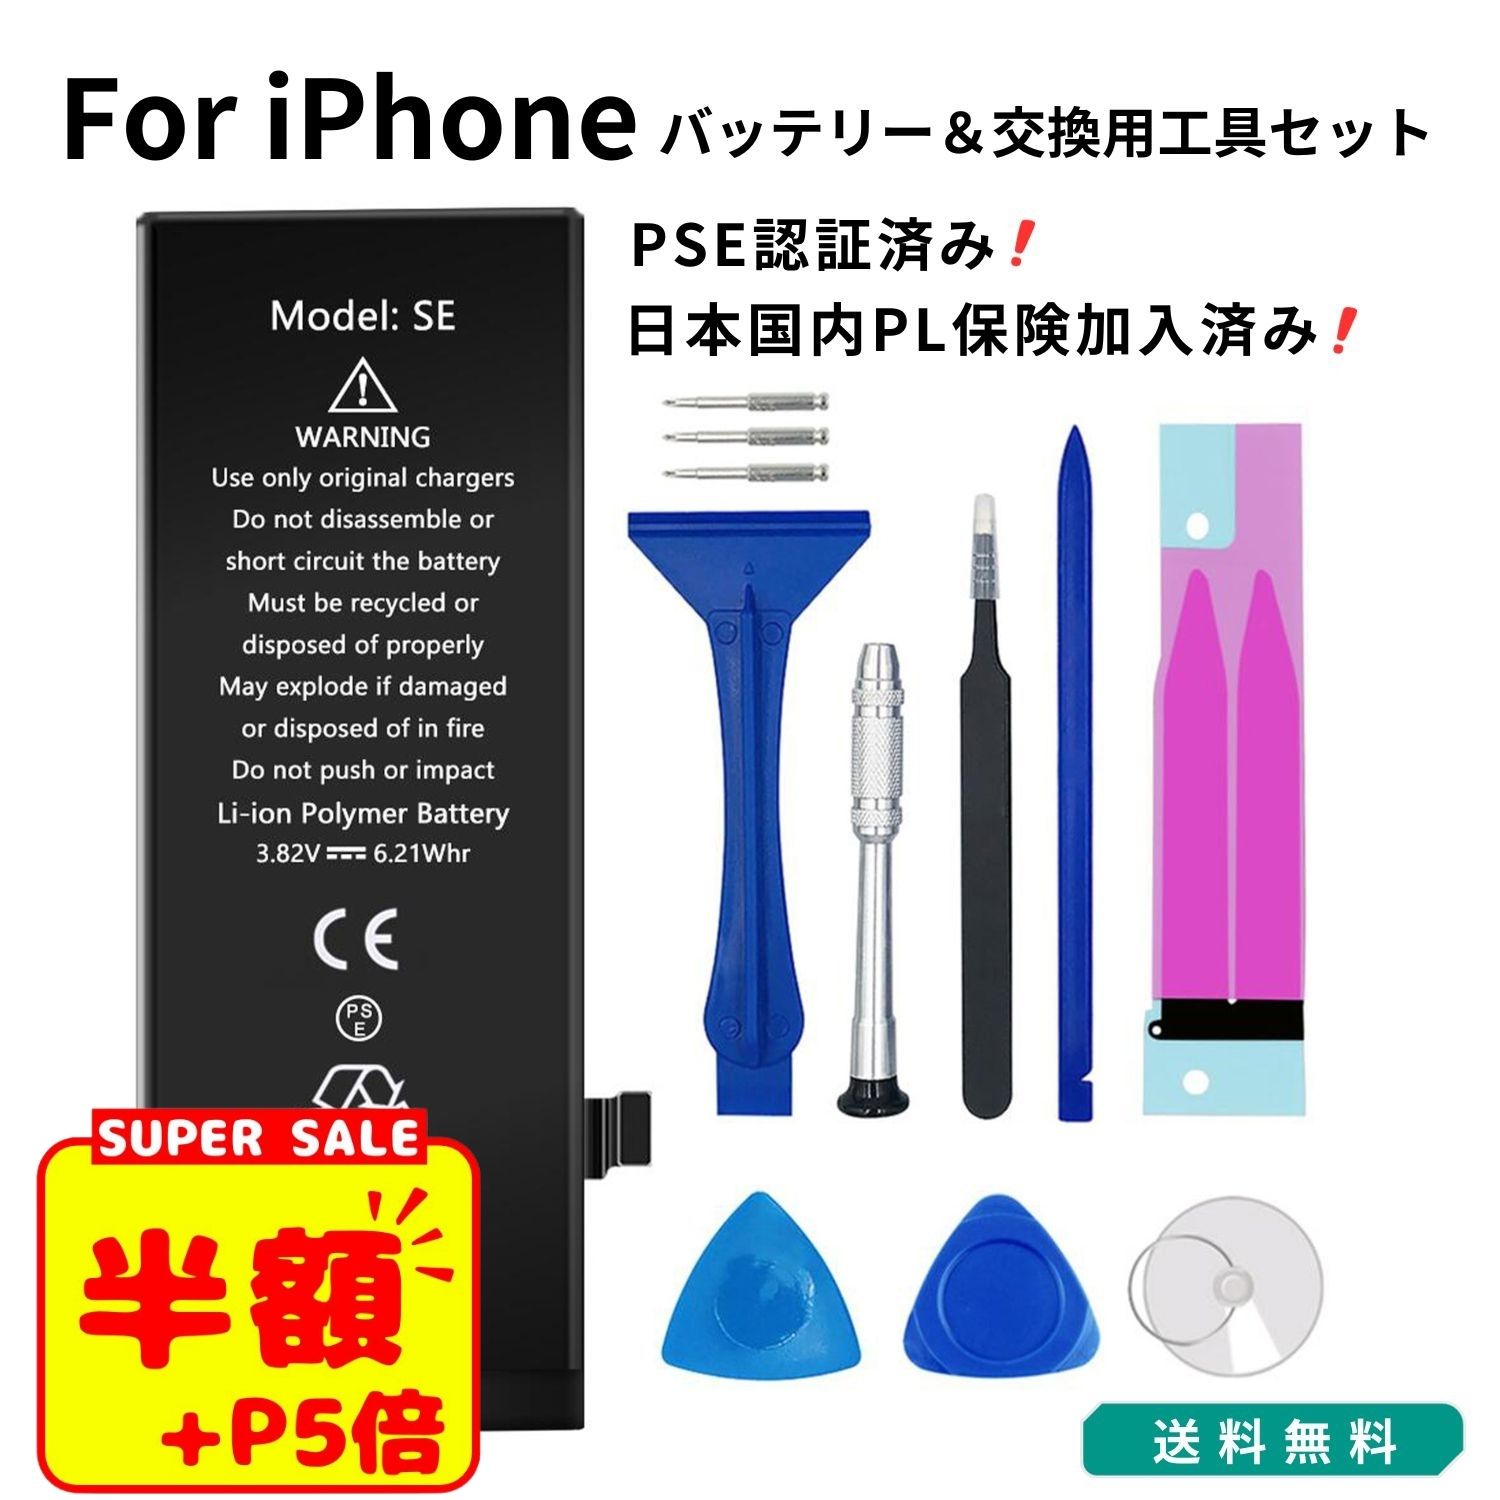 iphone バッテリー 交換キット 互換バッテリー 電池交換 30日間保証 iphone5 iphone5c iphone5s iphone6 iphone6s iphone6p iphone6sp iphone7 iphone7p iphone8 iphone8p iphoneSE iphoneSE2 iphoneX 送料無料 JH